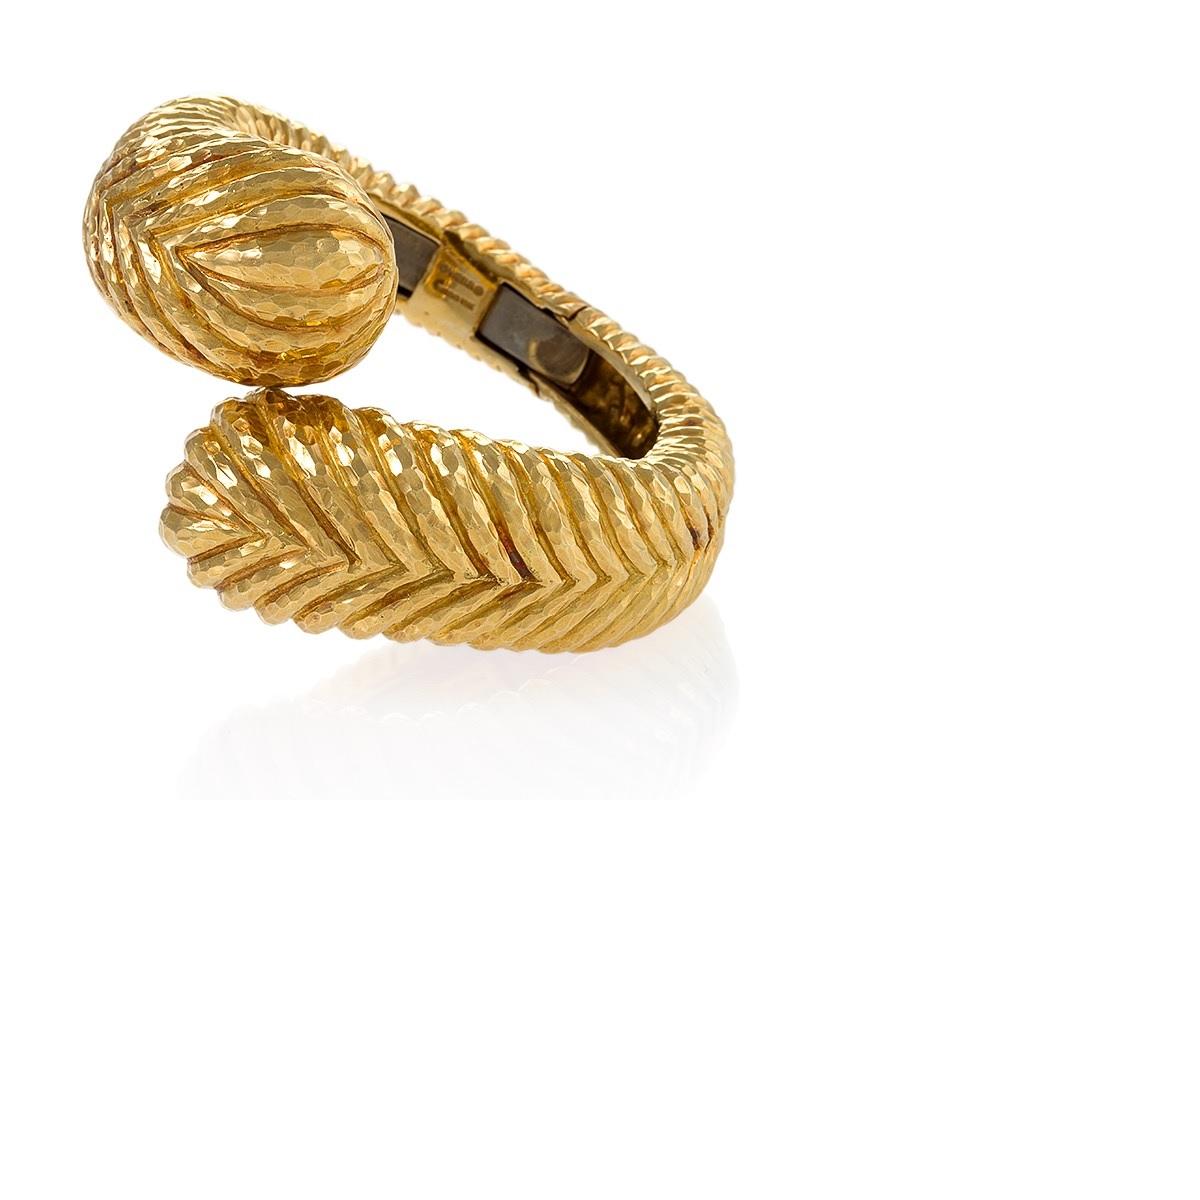 An American Late-20th Century 18 karat gold bracelet by David Webb.  The hinged bracelet is composed of hand hammered gold in a dimensional crossover feather motif.  Circa 1980's.
